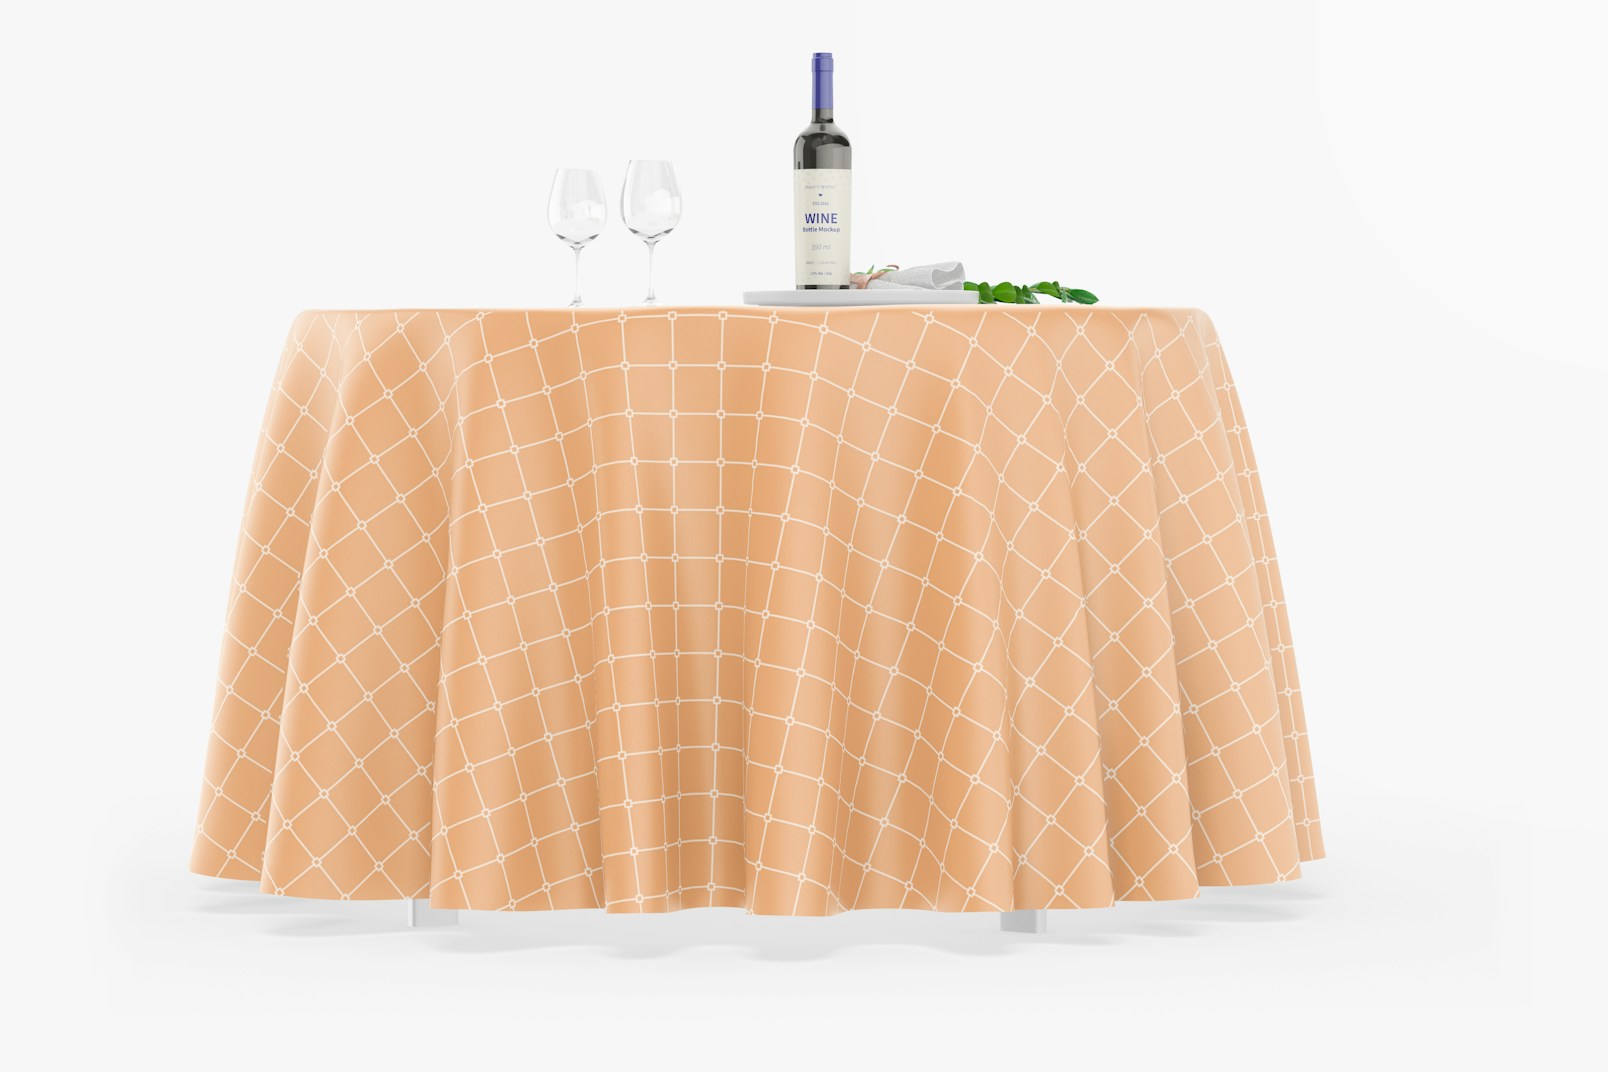 Round Tablecloth with Wine Bottle Mockup